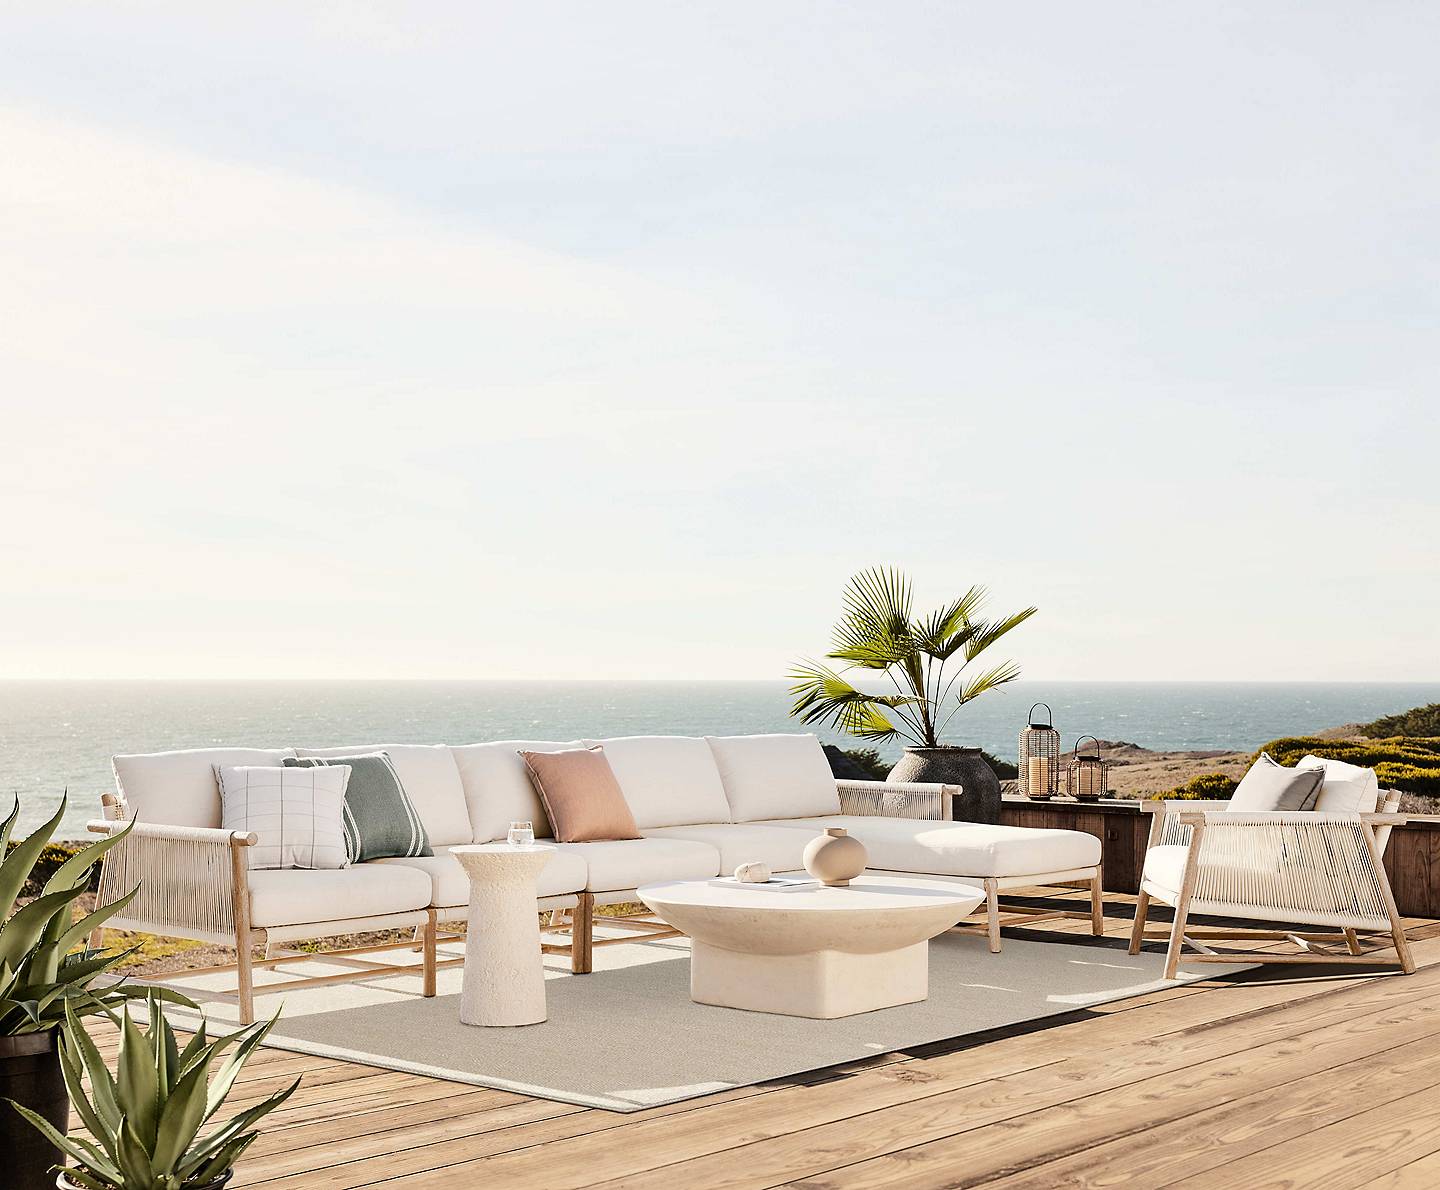 How To Care For Outdoor Furniture A Complete Guide Crate Barrel